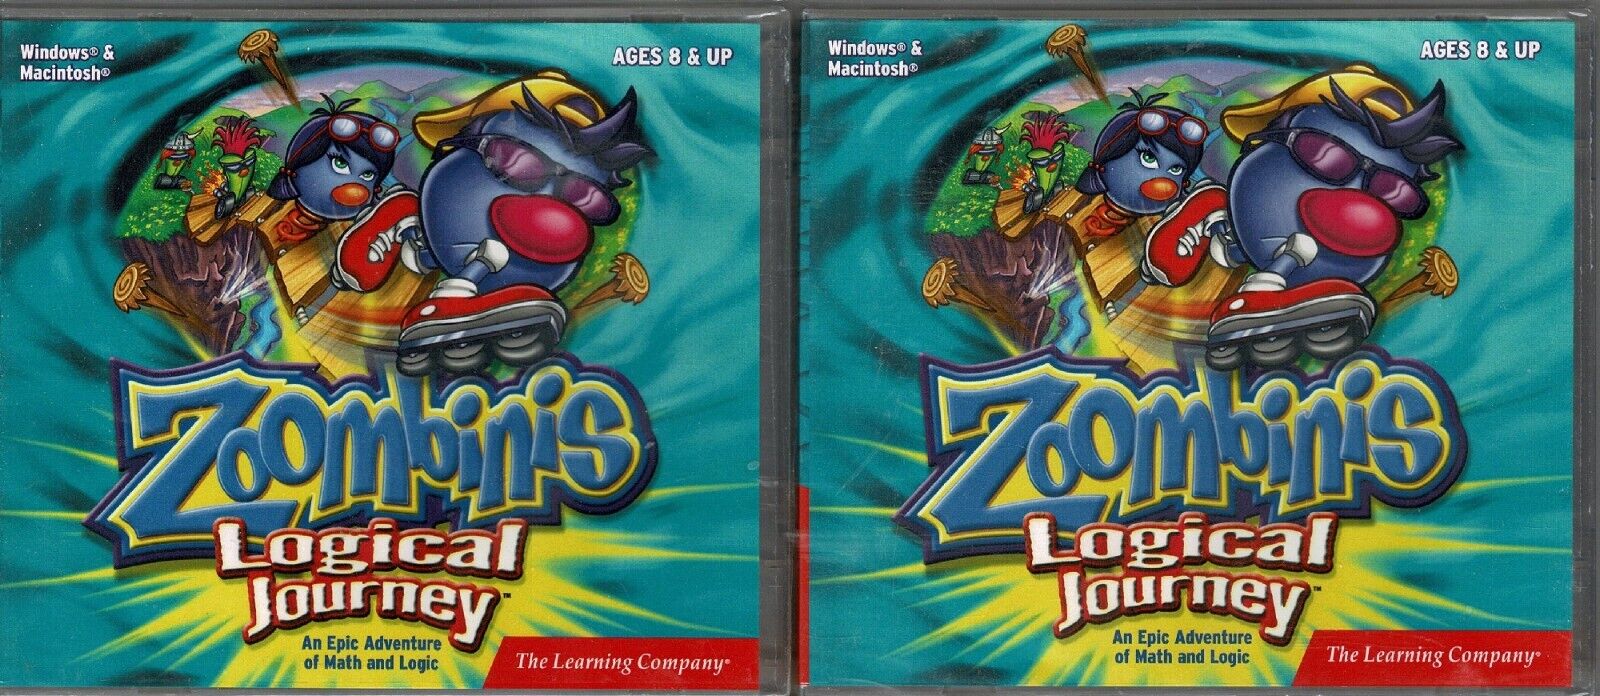 Lot of 2 Zoombinis Logical Journey Pc Mac Brand New Win10 8 7 XP Math Logic